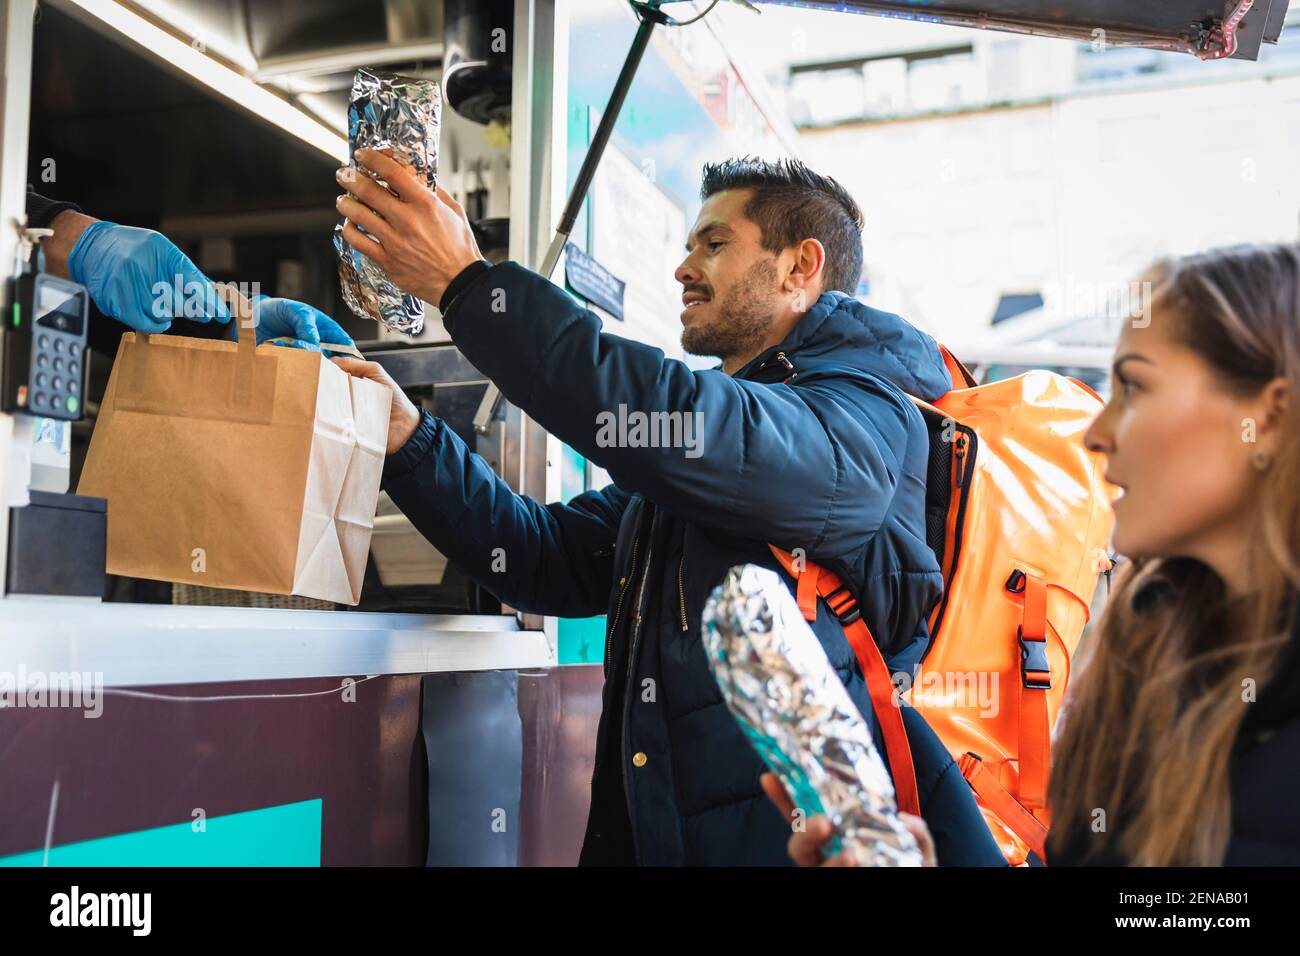 Customers purchasing food from owner at food truck Stock Photo